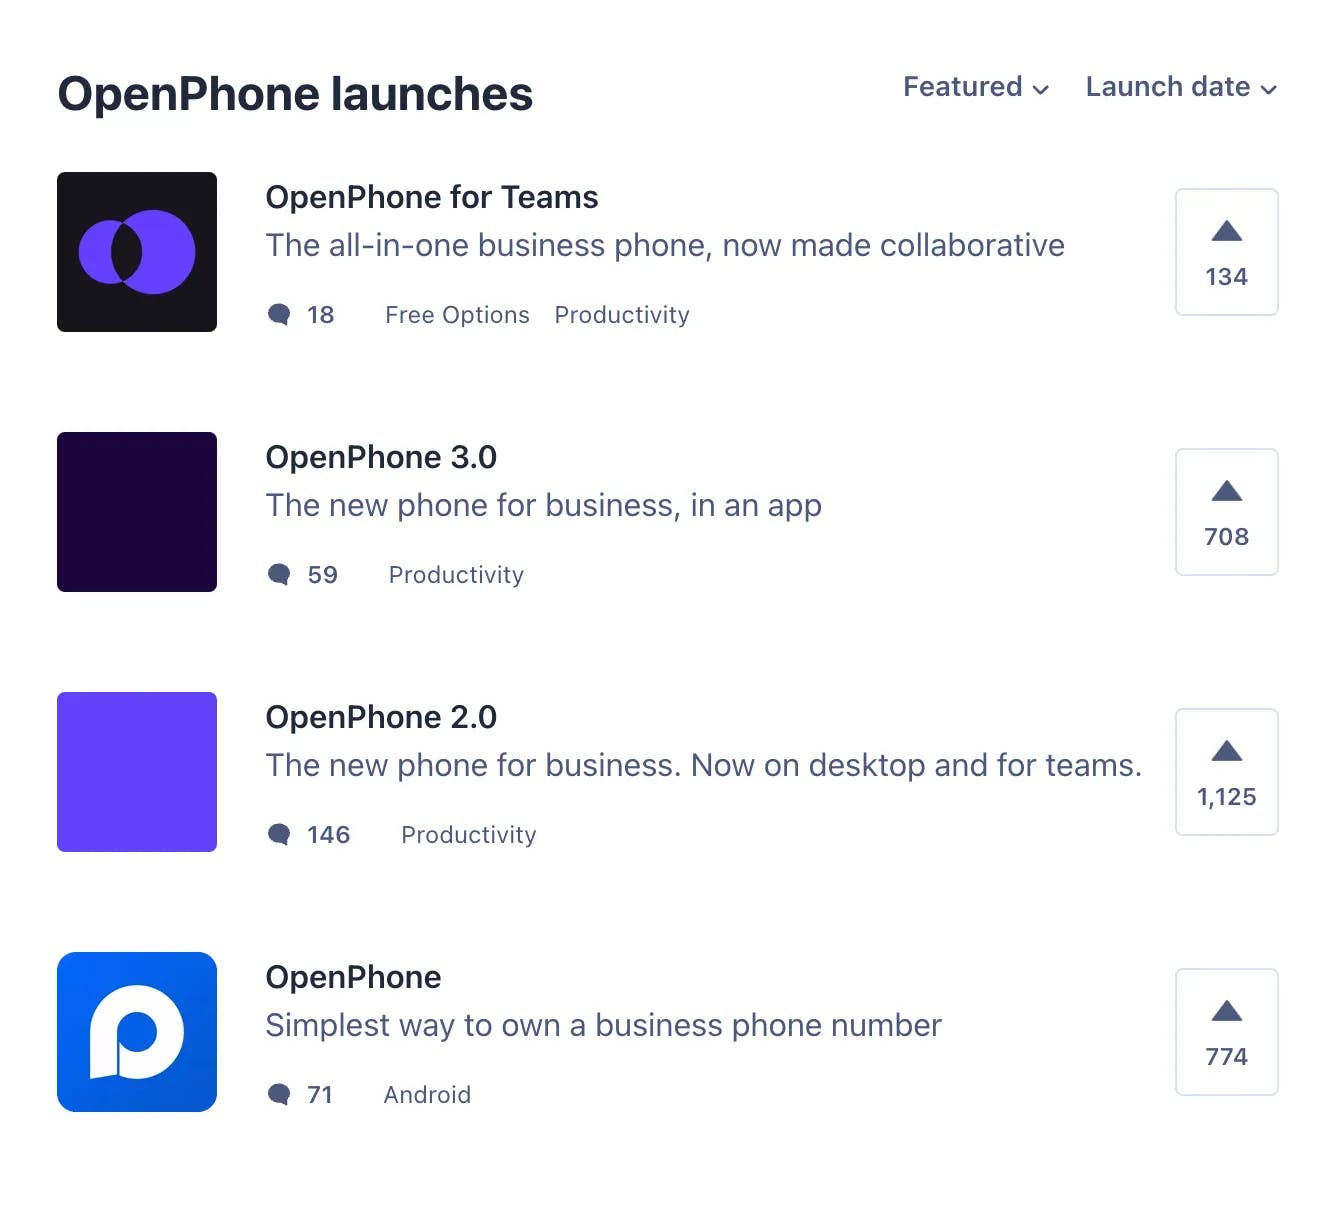 OpenPhone’s PH launches over the ages 🚀